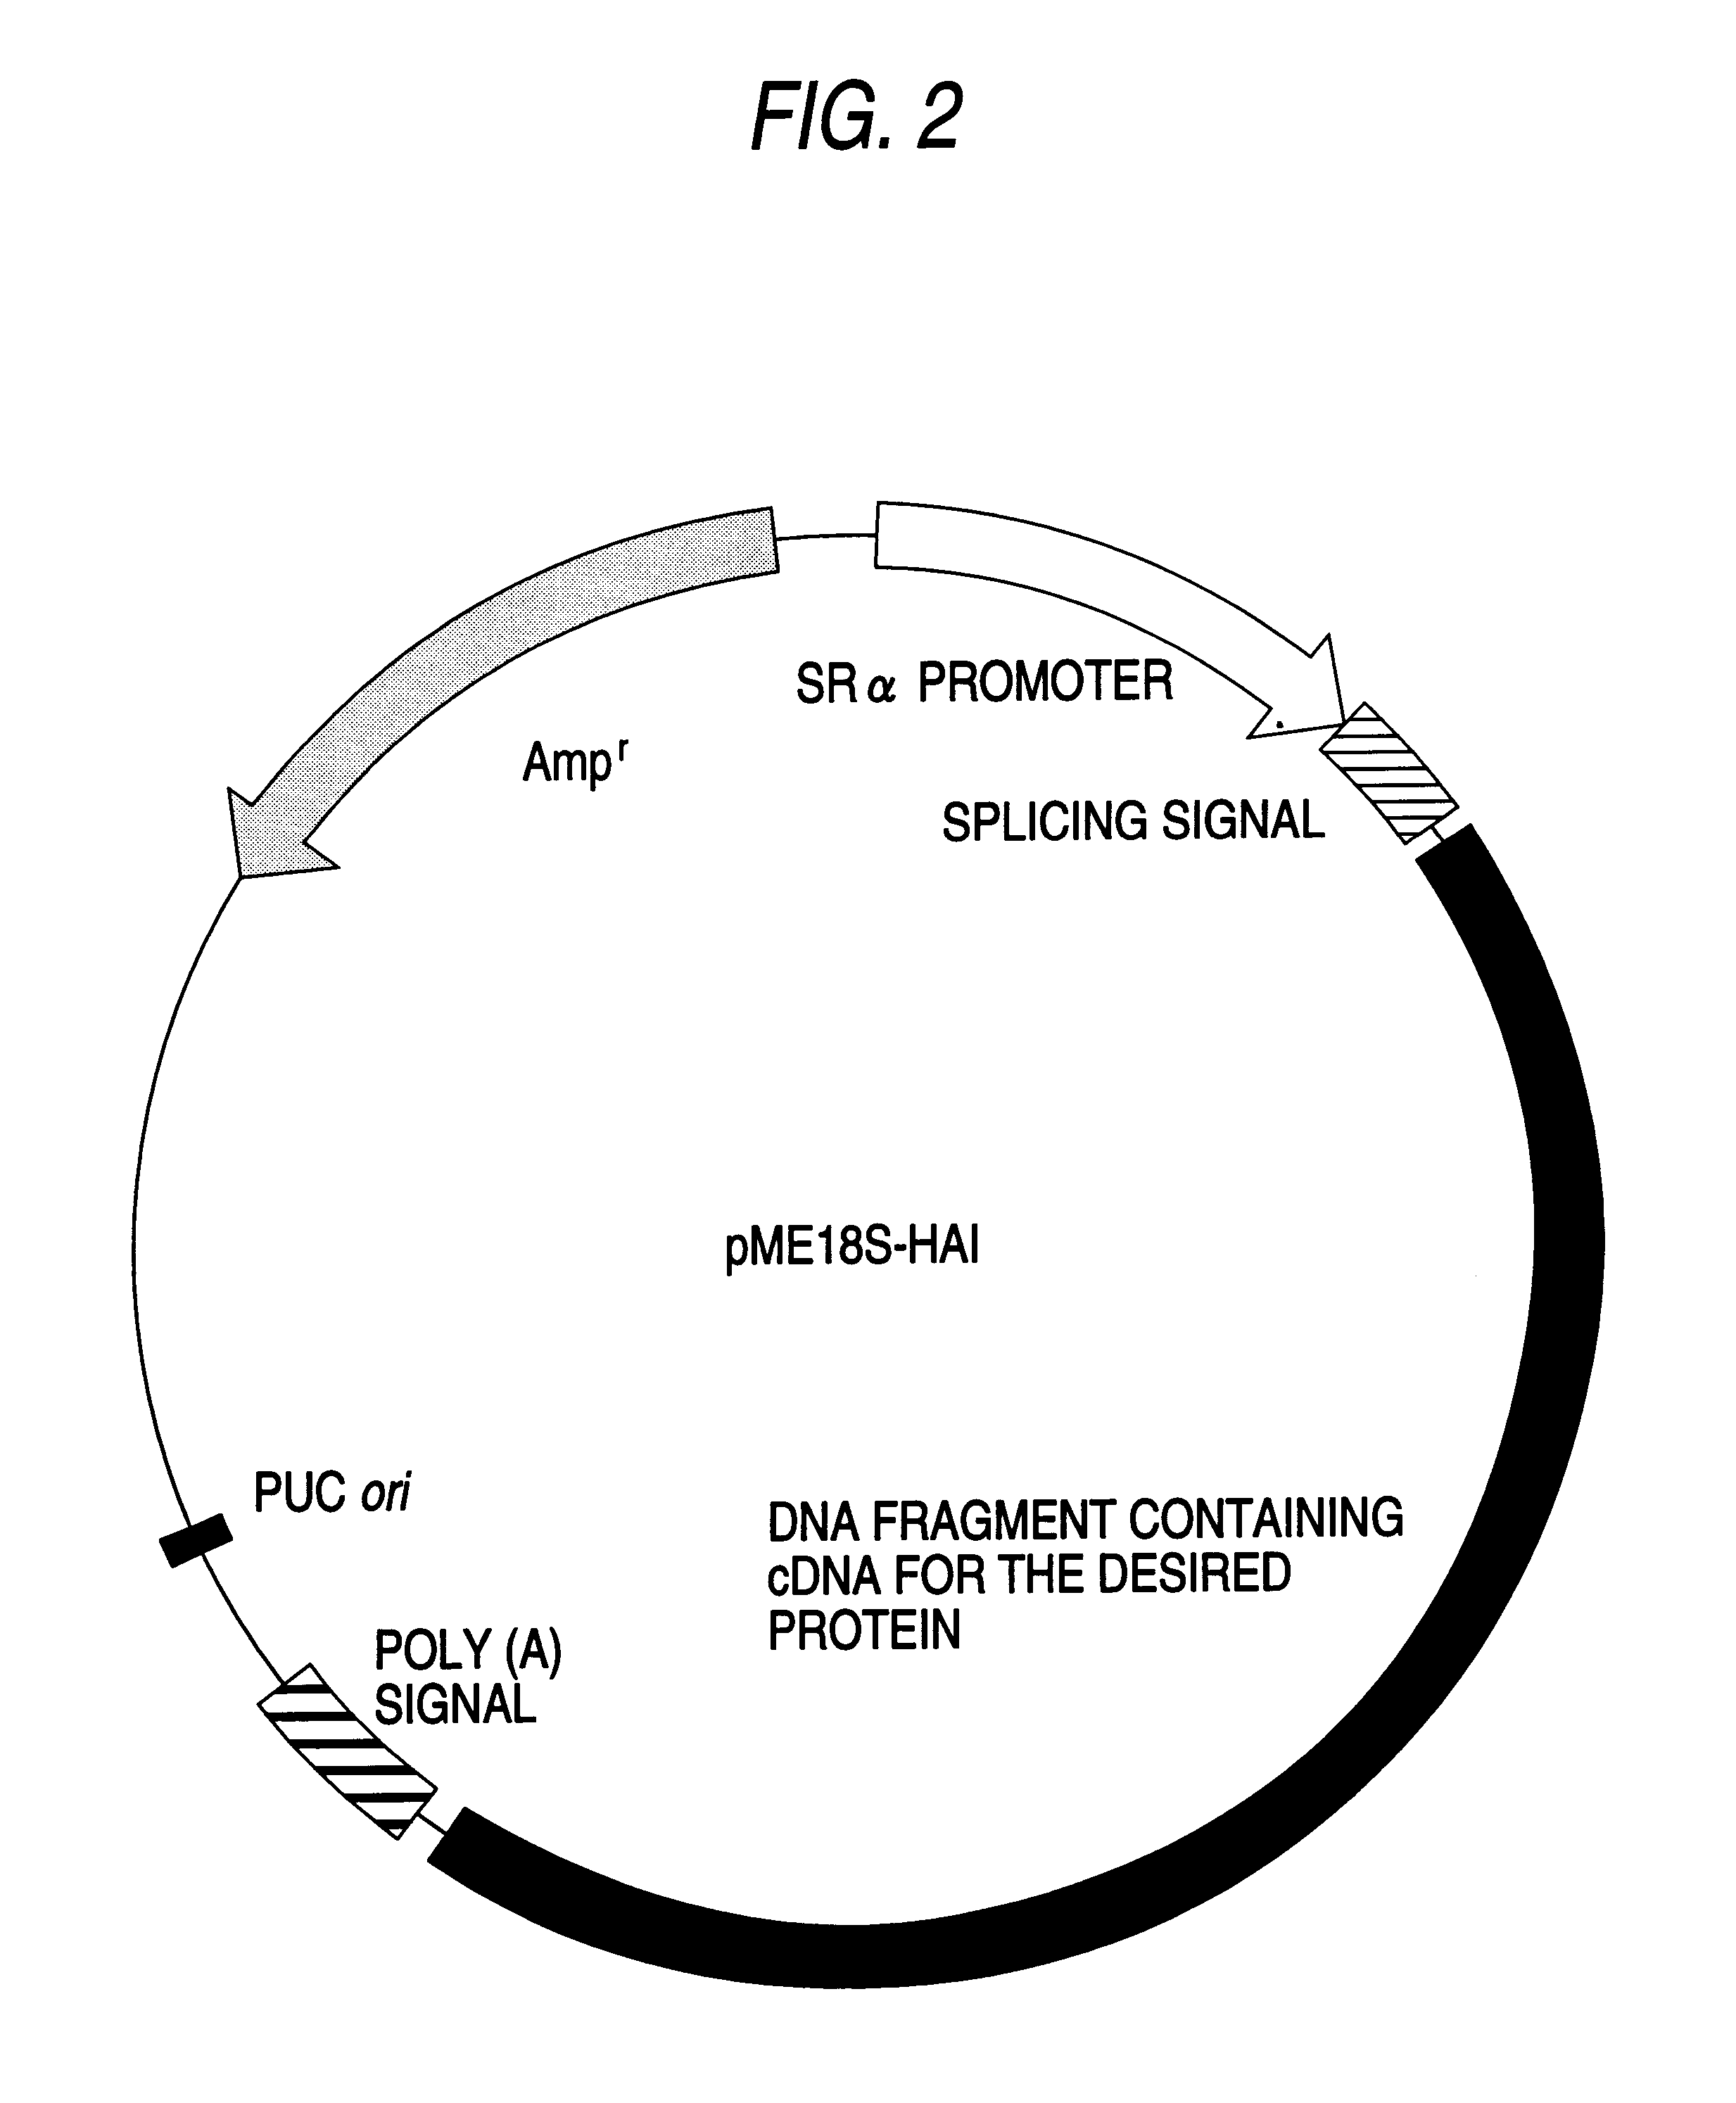 Protein, DNA coding for same and method of producing the protein